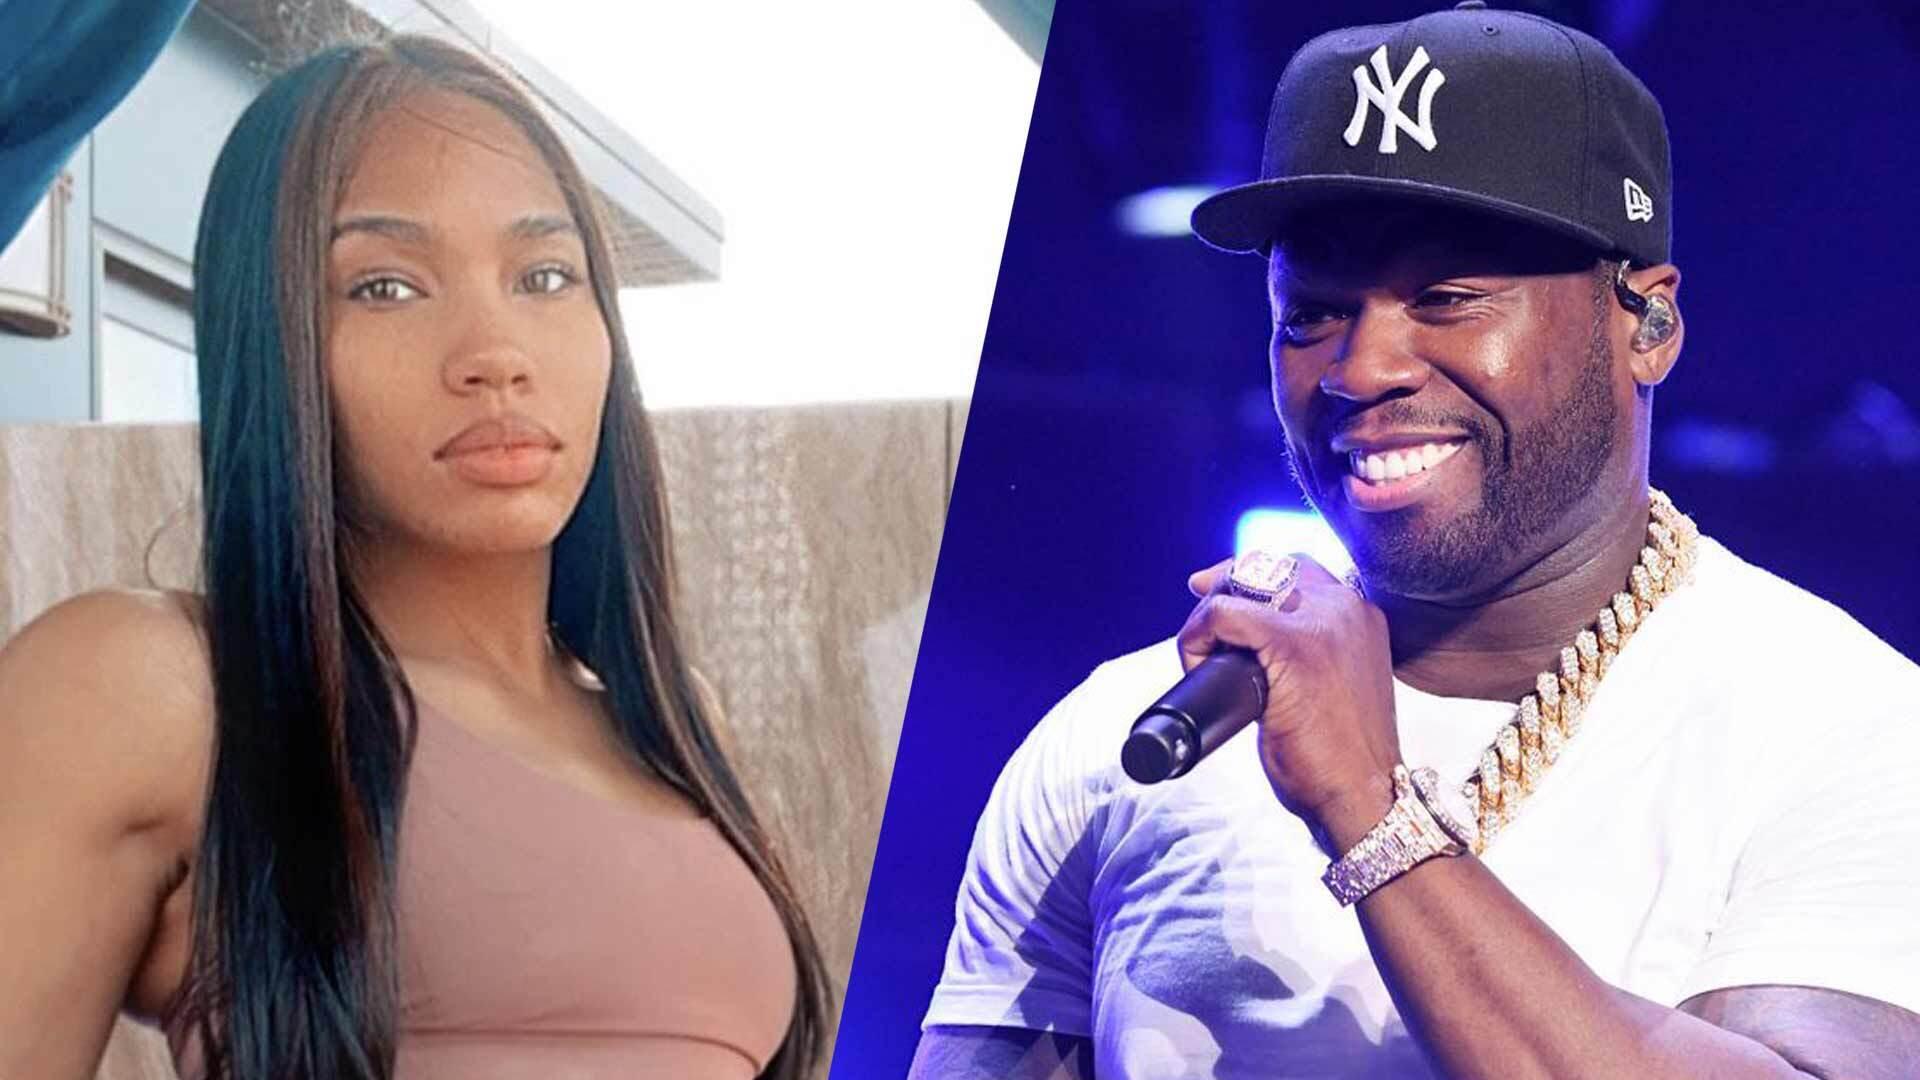 50 Cent’s Girlfriend Cuban Link Sizzles While Locked Up With Rapper